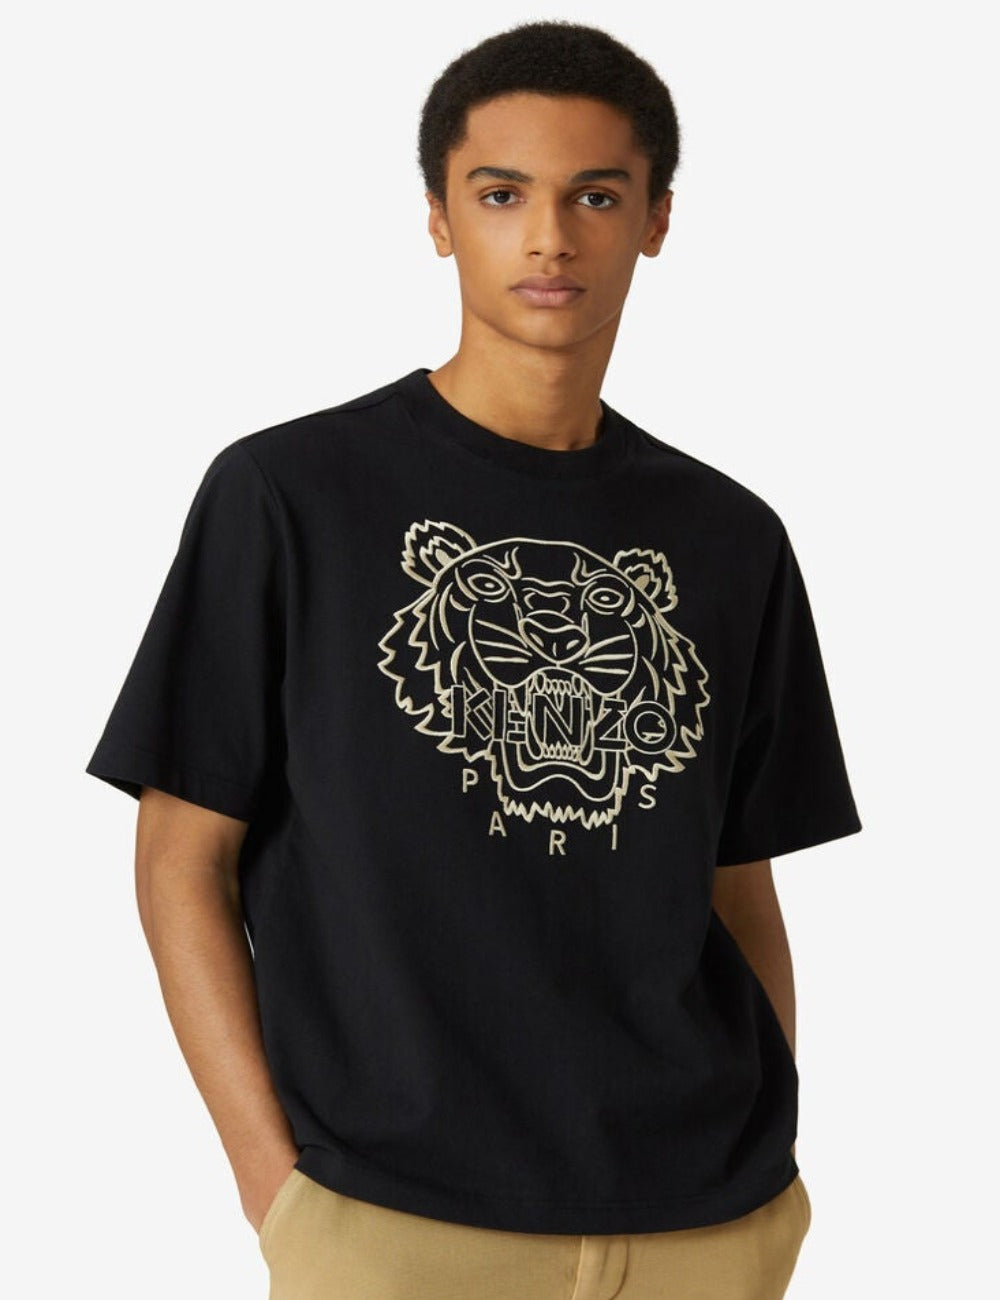 Kenzo Tiger loose-fitting Embroidered T-shirt ( New Design ) - Shop Streetwear, Sneakers, Slippers and Gifts online | Malaysia - The Factory KL